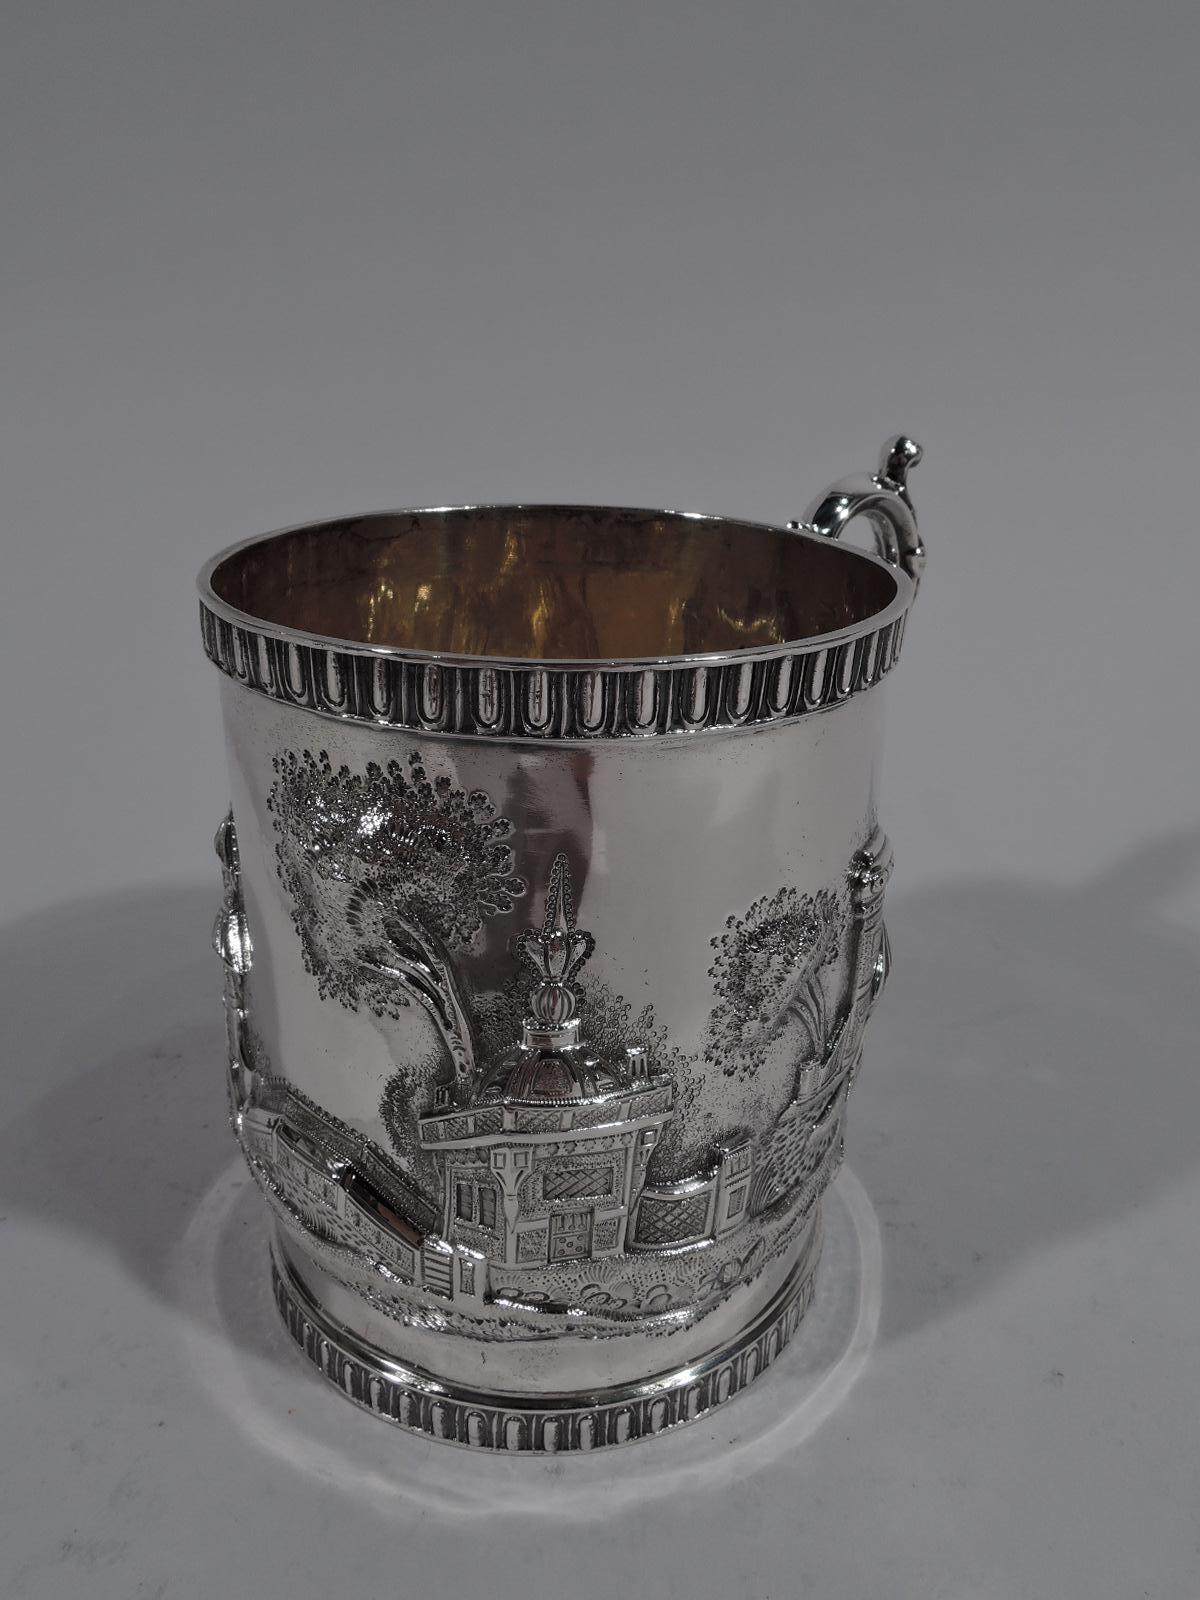 Architectural coin silver baby cup, mid-19th century. Straight sides with leaf-capped and mounted s-scroll handle. Repousse fantasy buildings including turret, pagoda, pavilion, and picturesque bridge. Stylized egg-and-dart rims. Gilt-washed